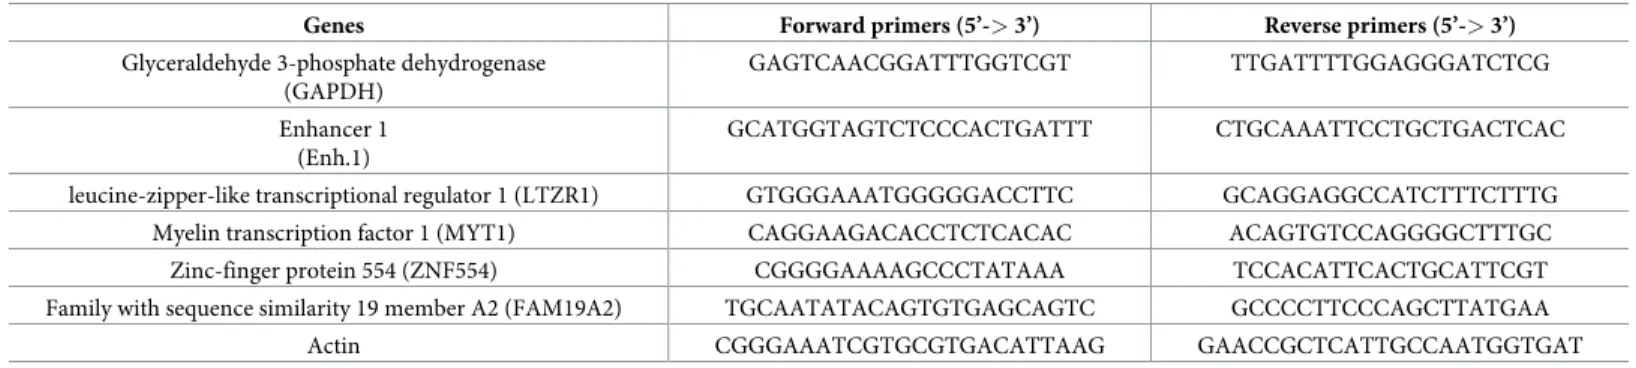 Table 3. Primer sequences and target cellular genes.